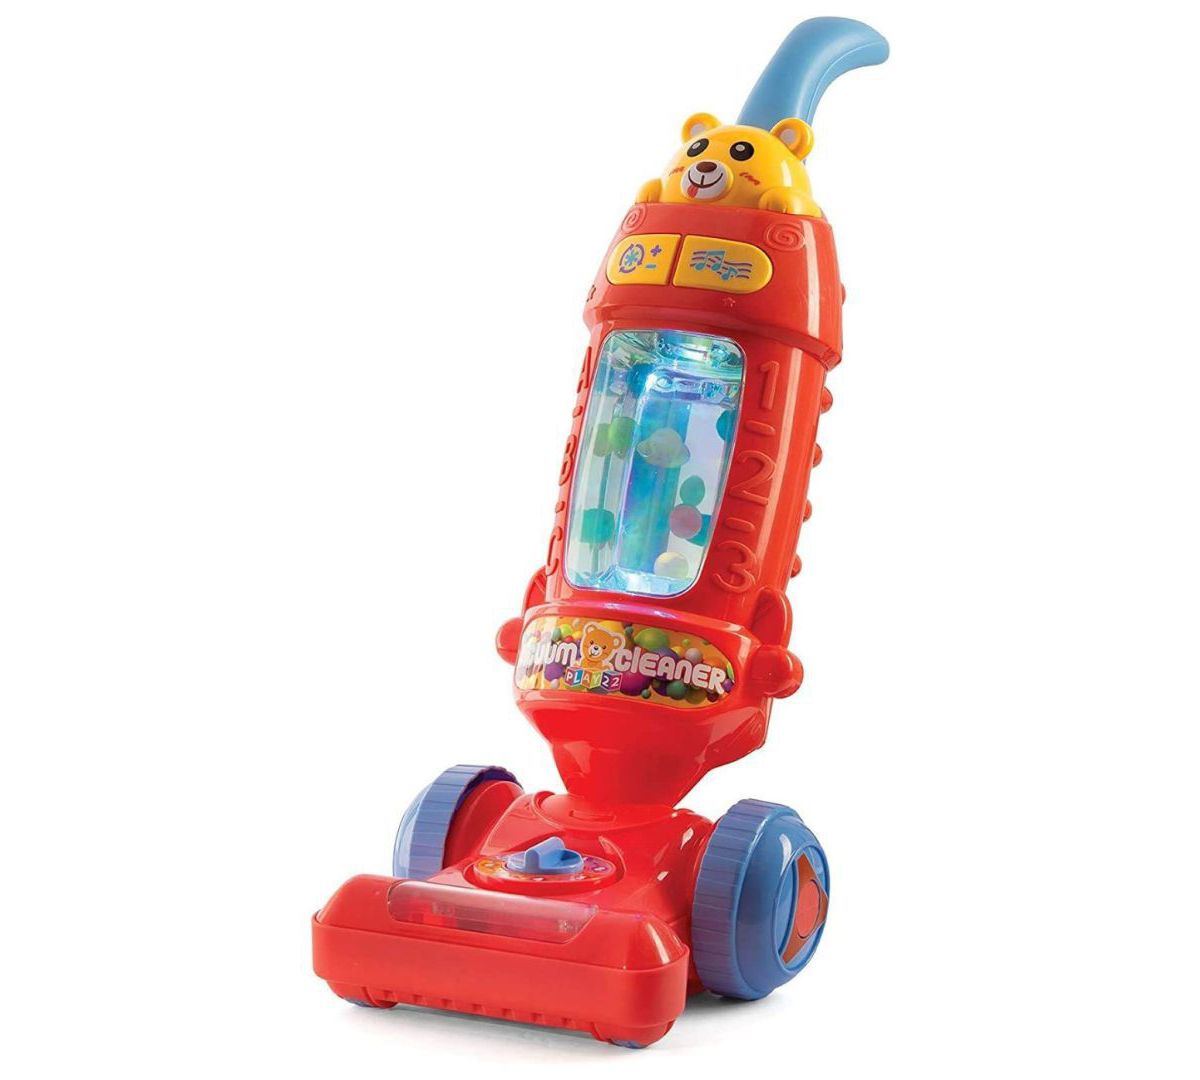 Kids Vacuum Cleaner Toy for Toddler with Lights & Sounds Effects & Ball-Popping Action Play22